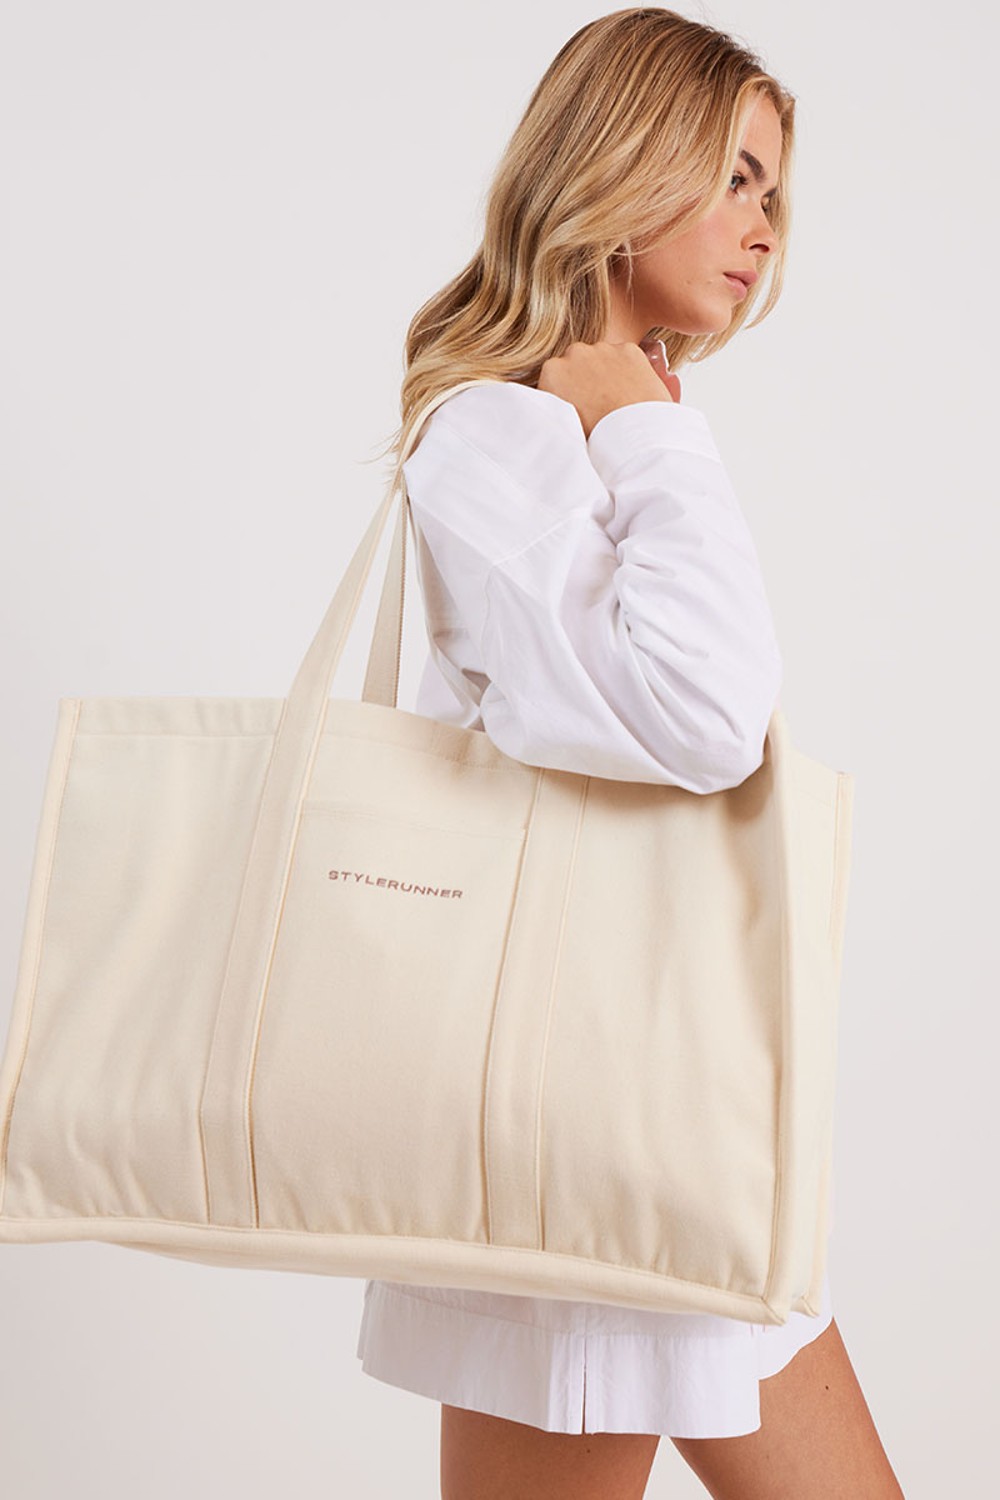 Stylerunner Square Off Canvas Tote Bag Almond